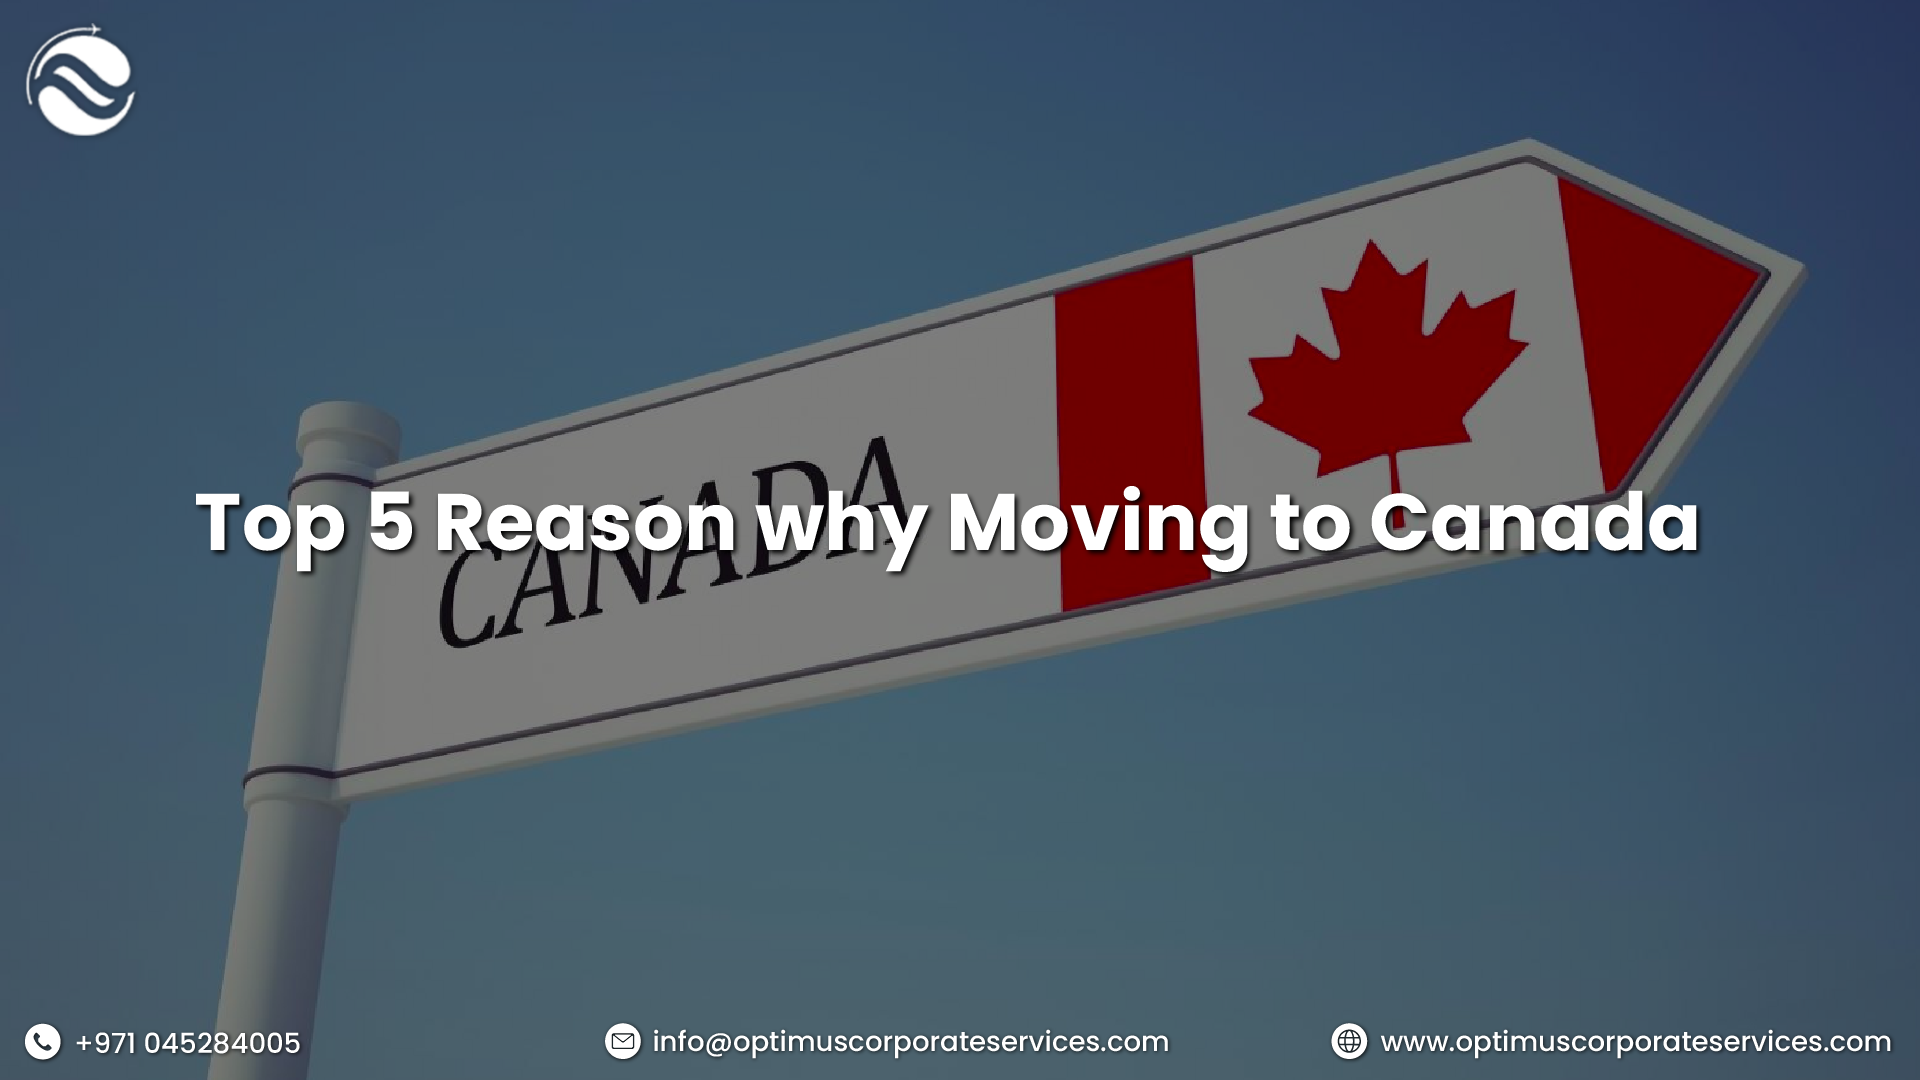 Top 5 Reasons Why Moving to Canada